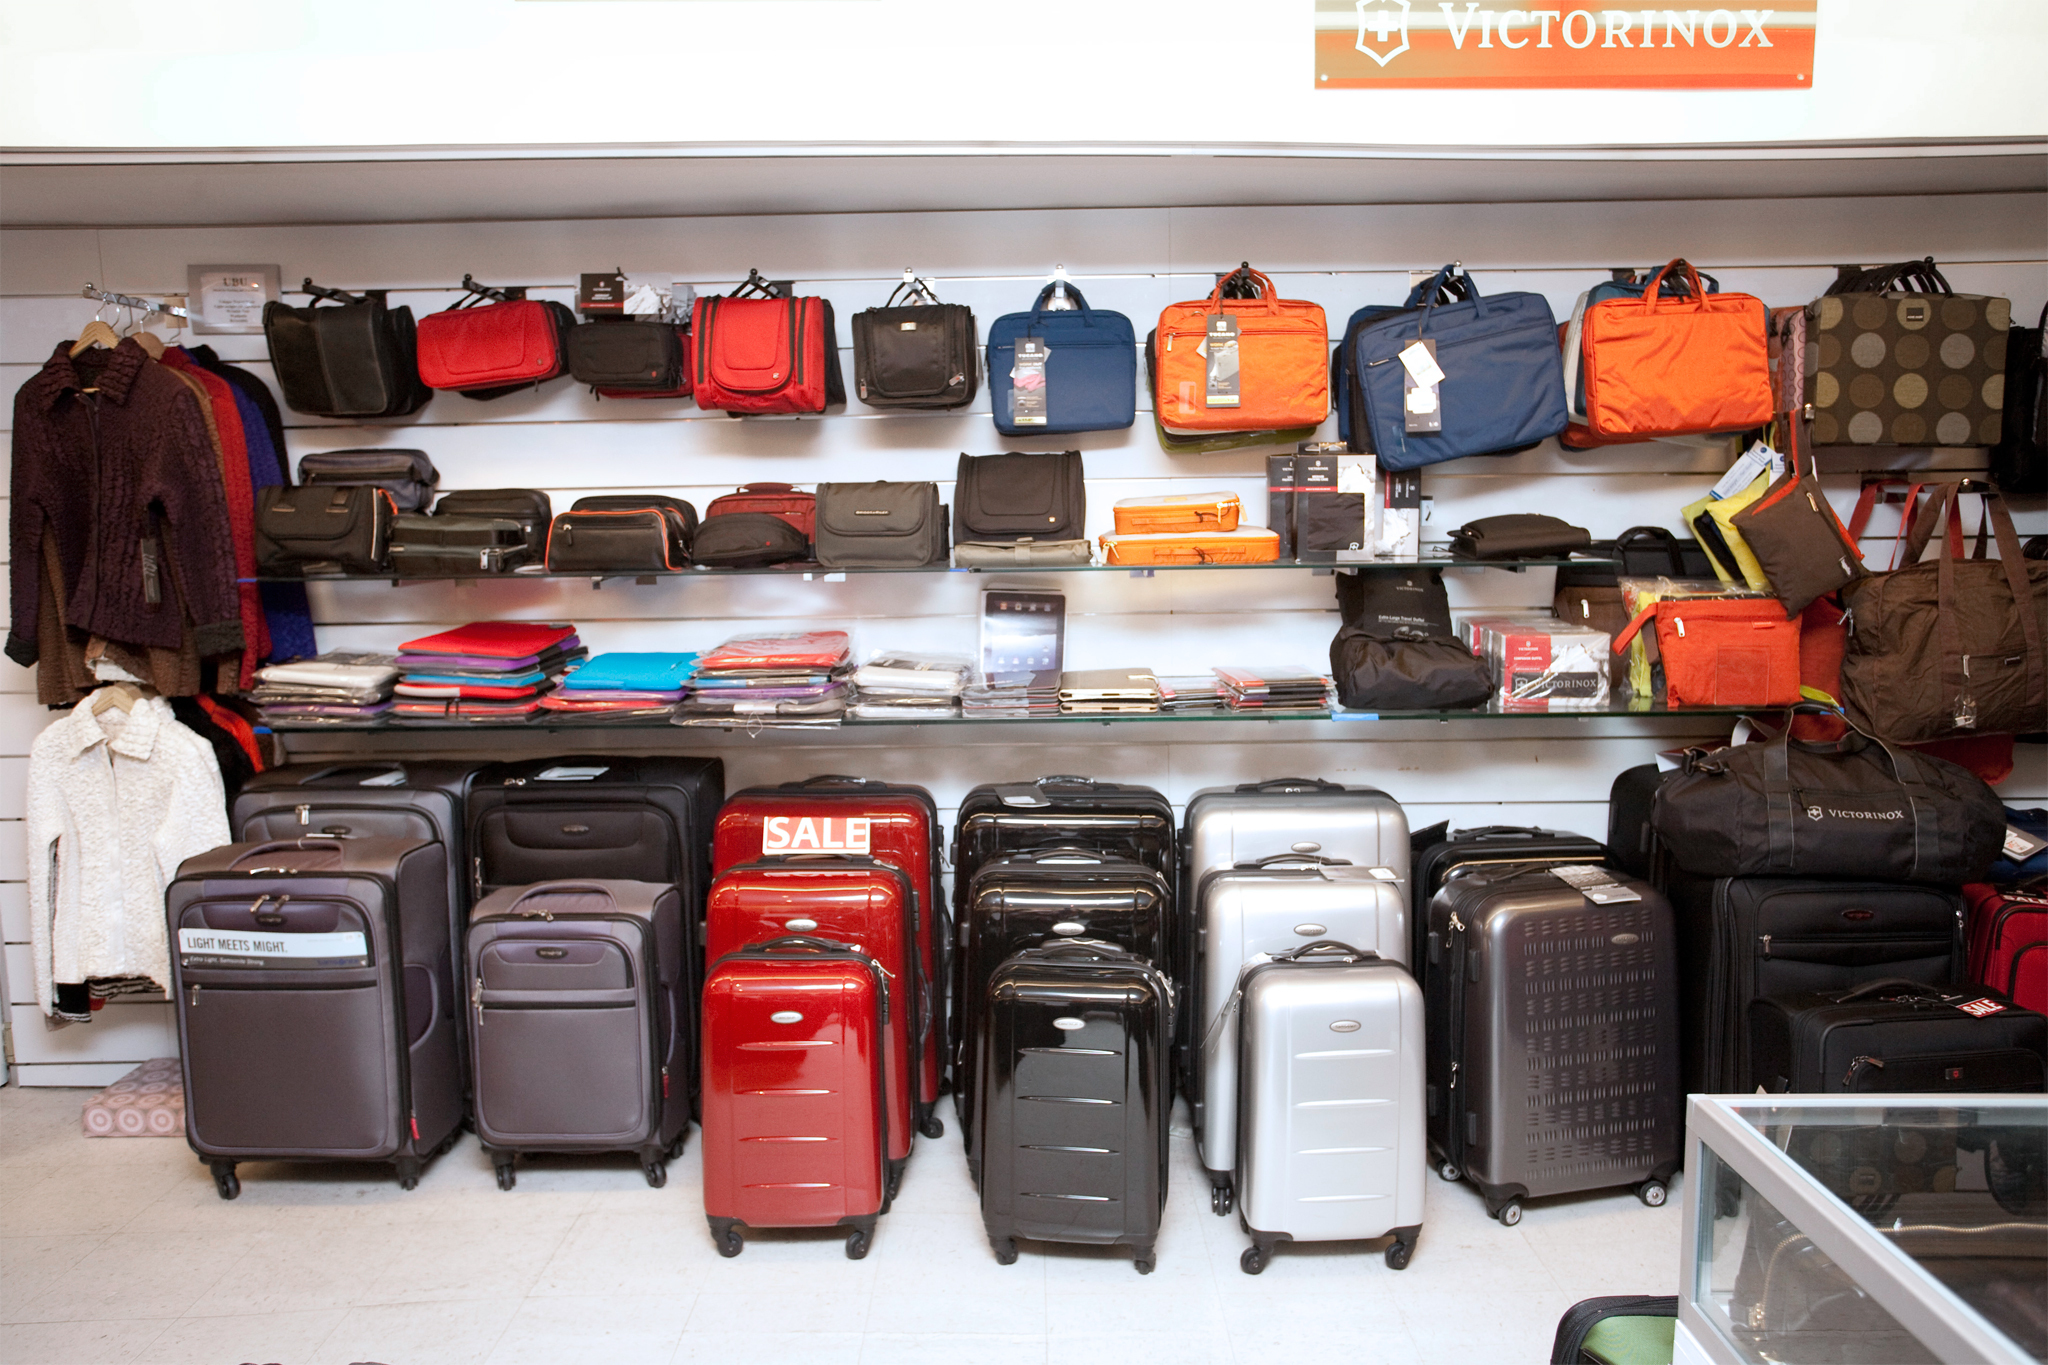 Is shop travel. Luggage Store. Luggage Bag shop in Barcelona. Luggage Store MD.